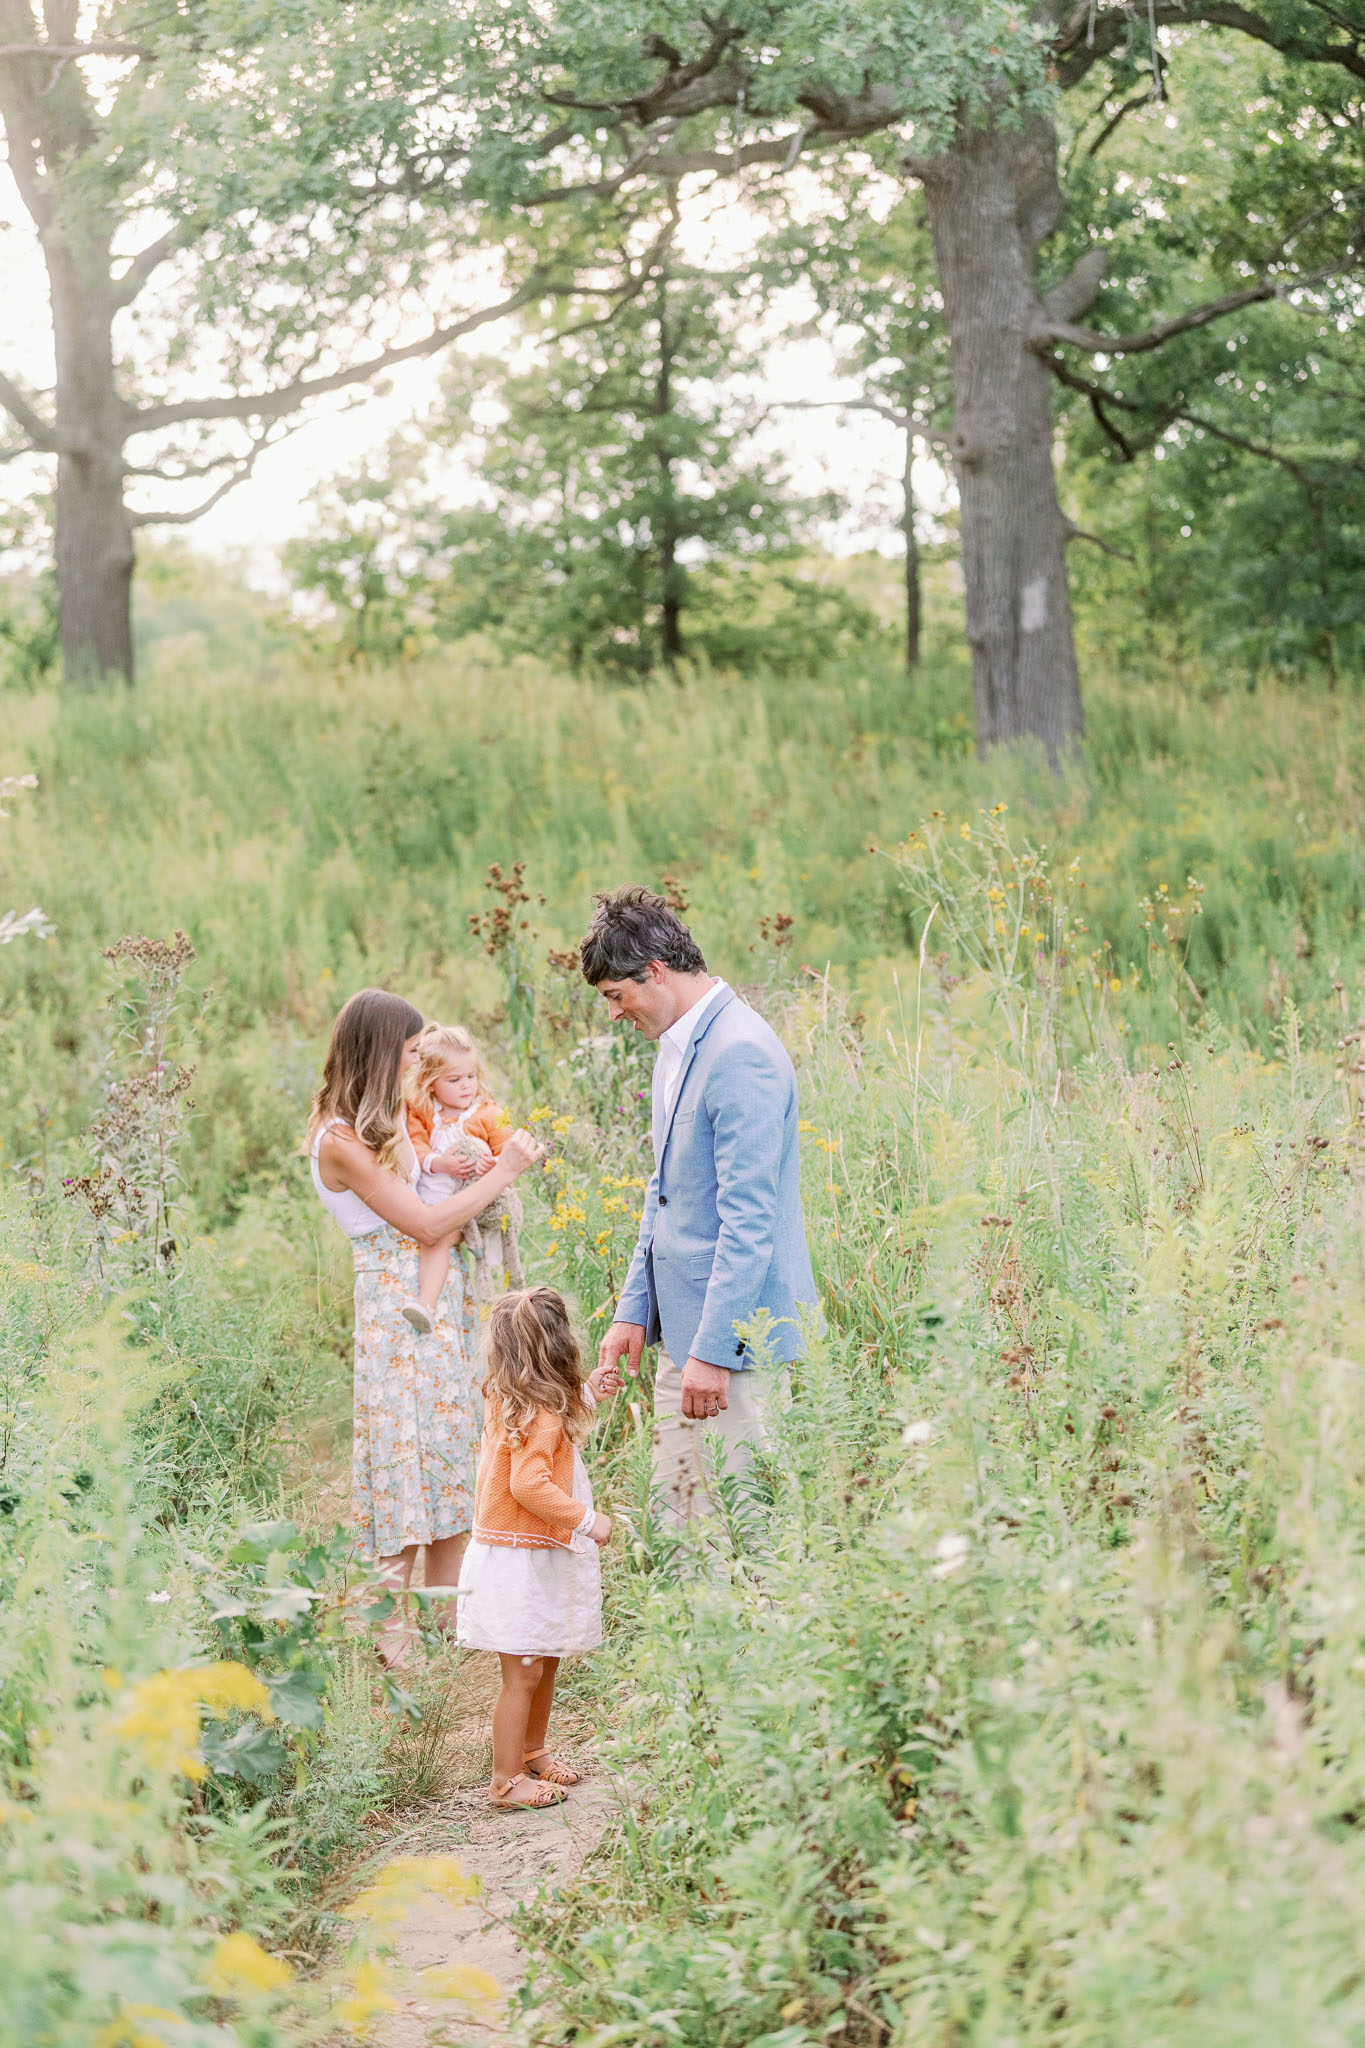 Light and Airy Chicago Naples Lifestyle Family Photographer – Mayslake Forest Preserve Family Photos-55